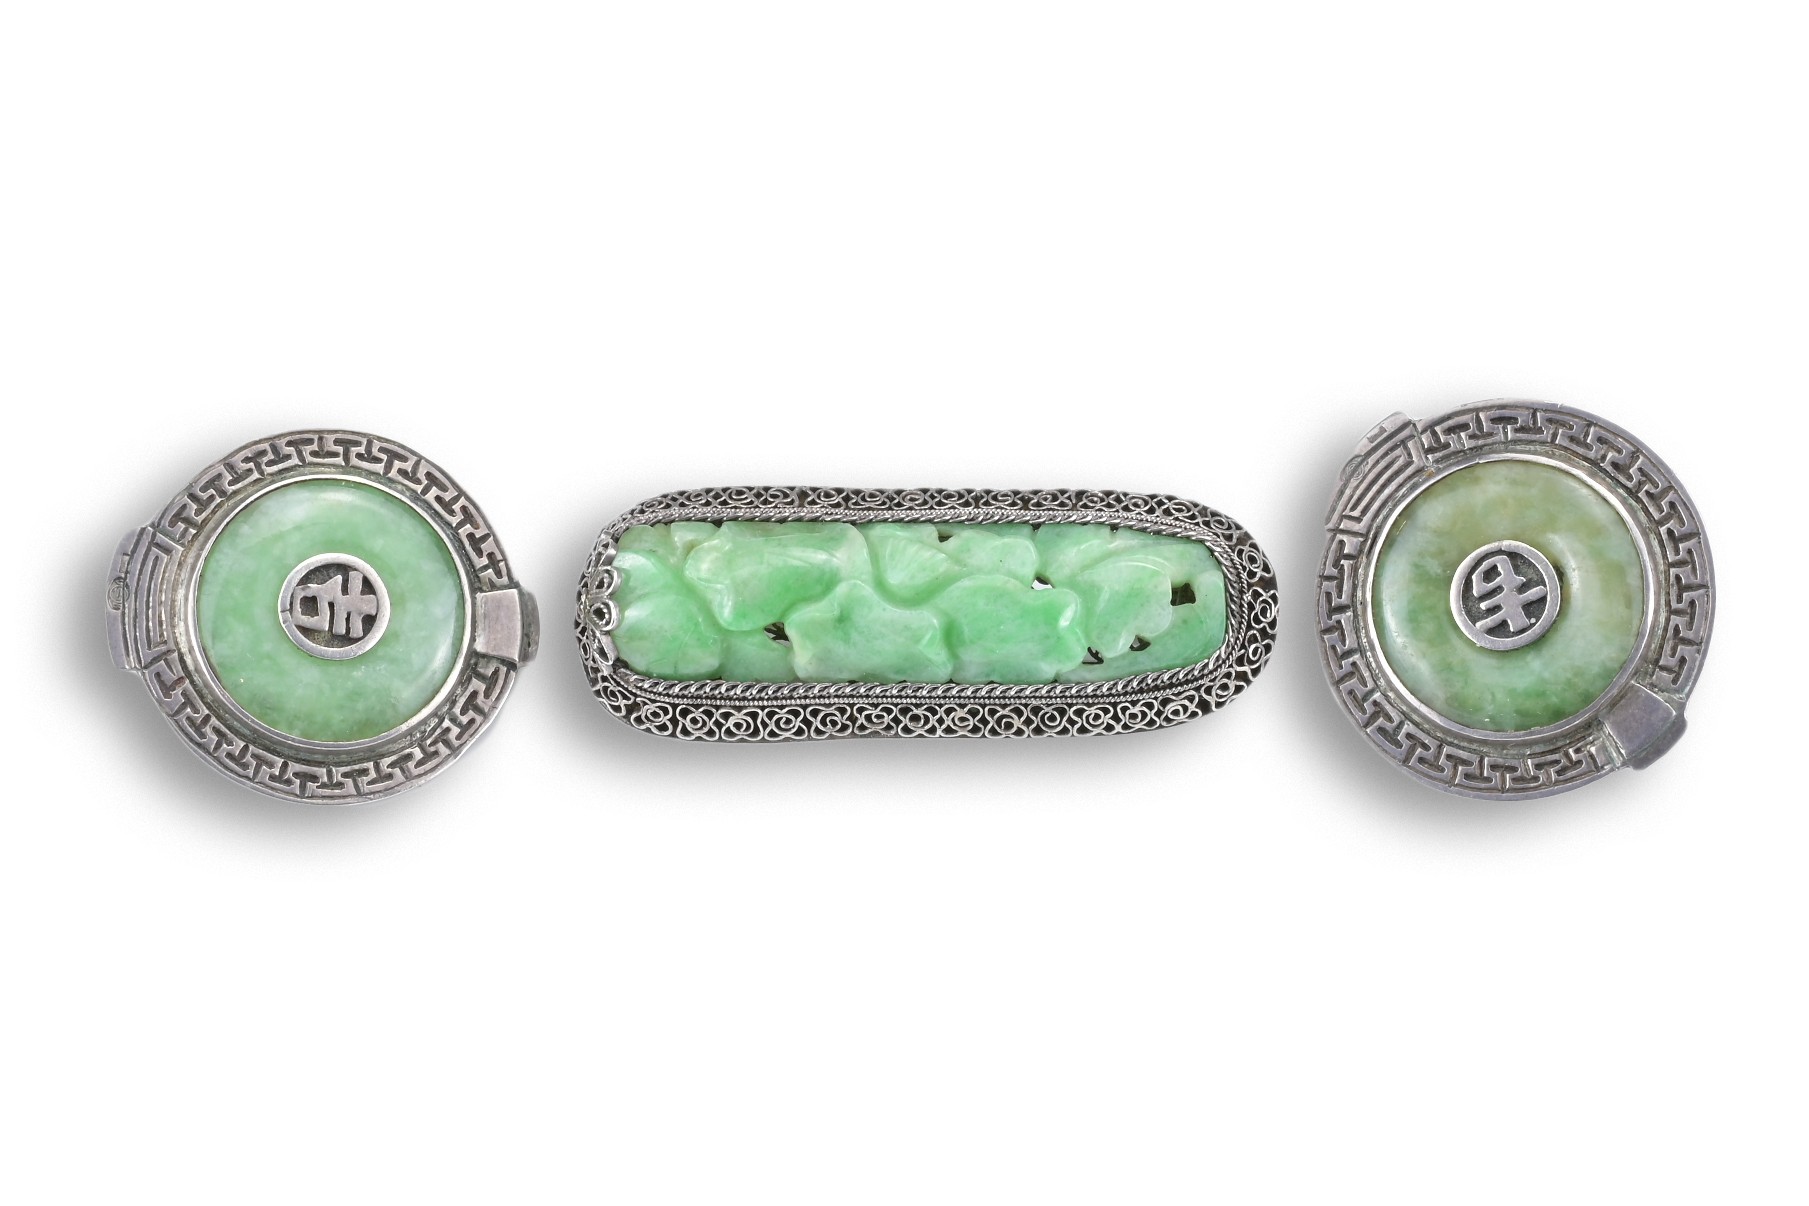 A CHINESE SILVER JADEITE BROOCH WITH CLIPS, 20TH CENTURY. The carved jadeite lotus leaf group